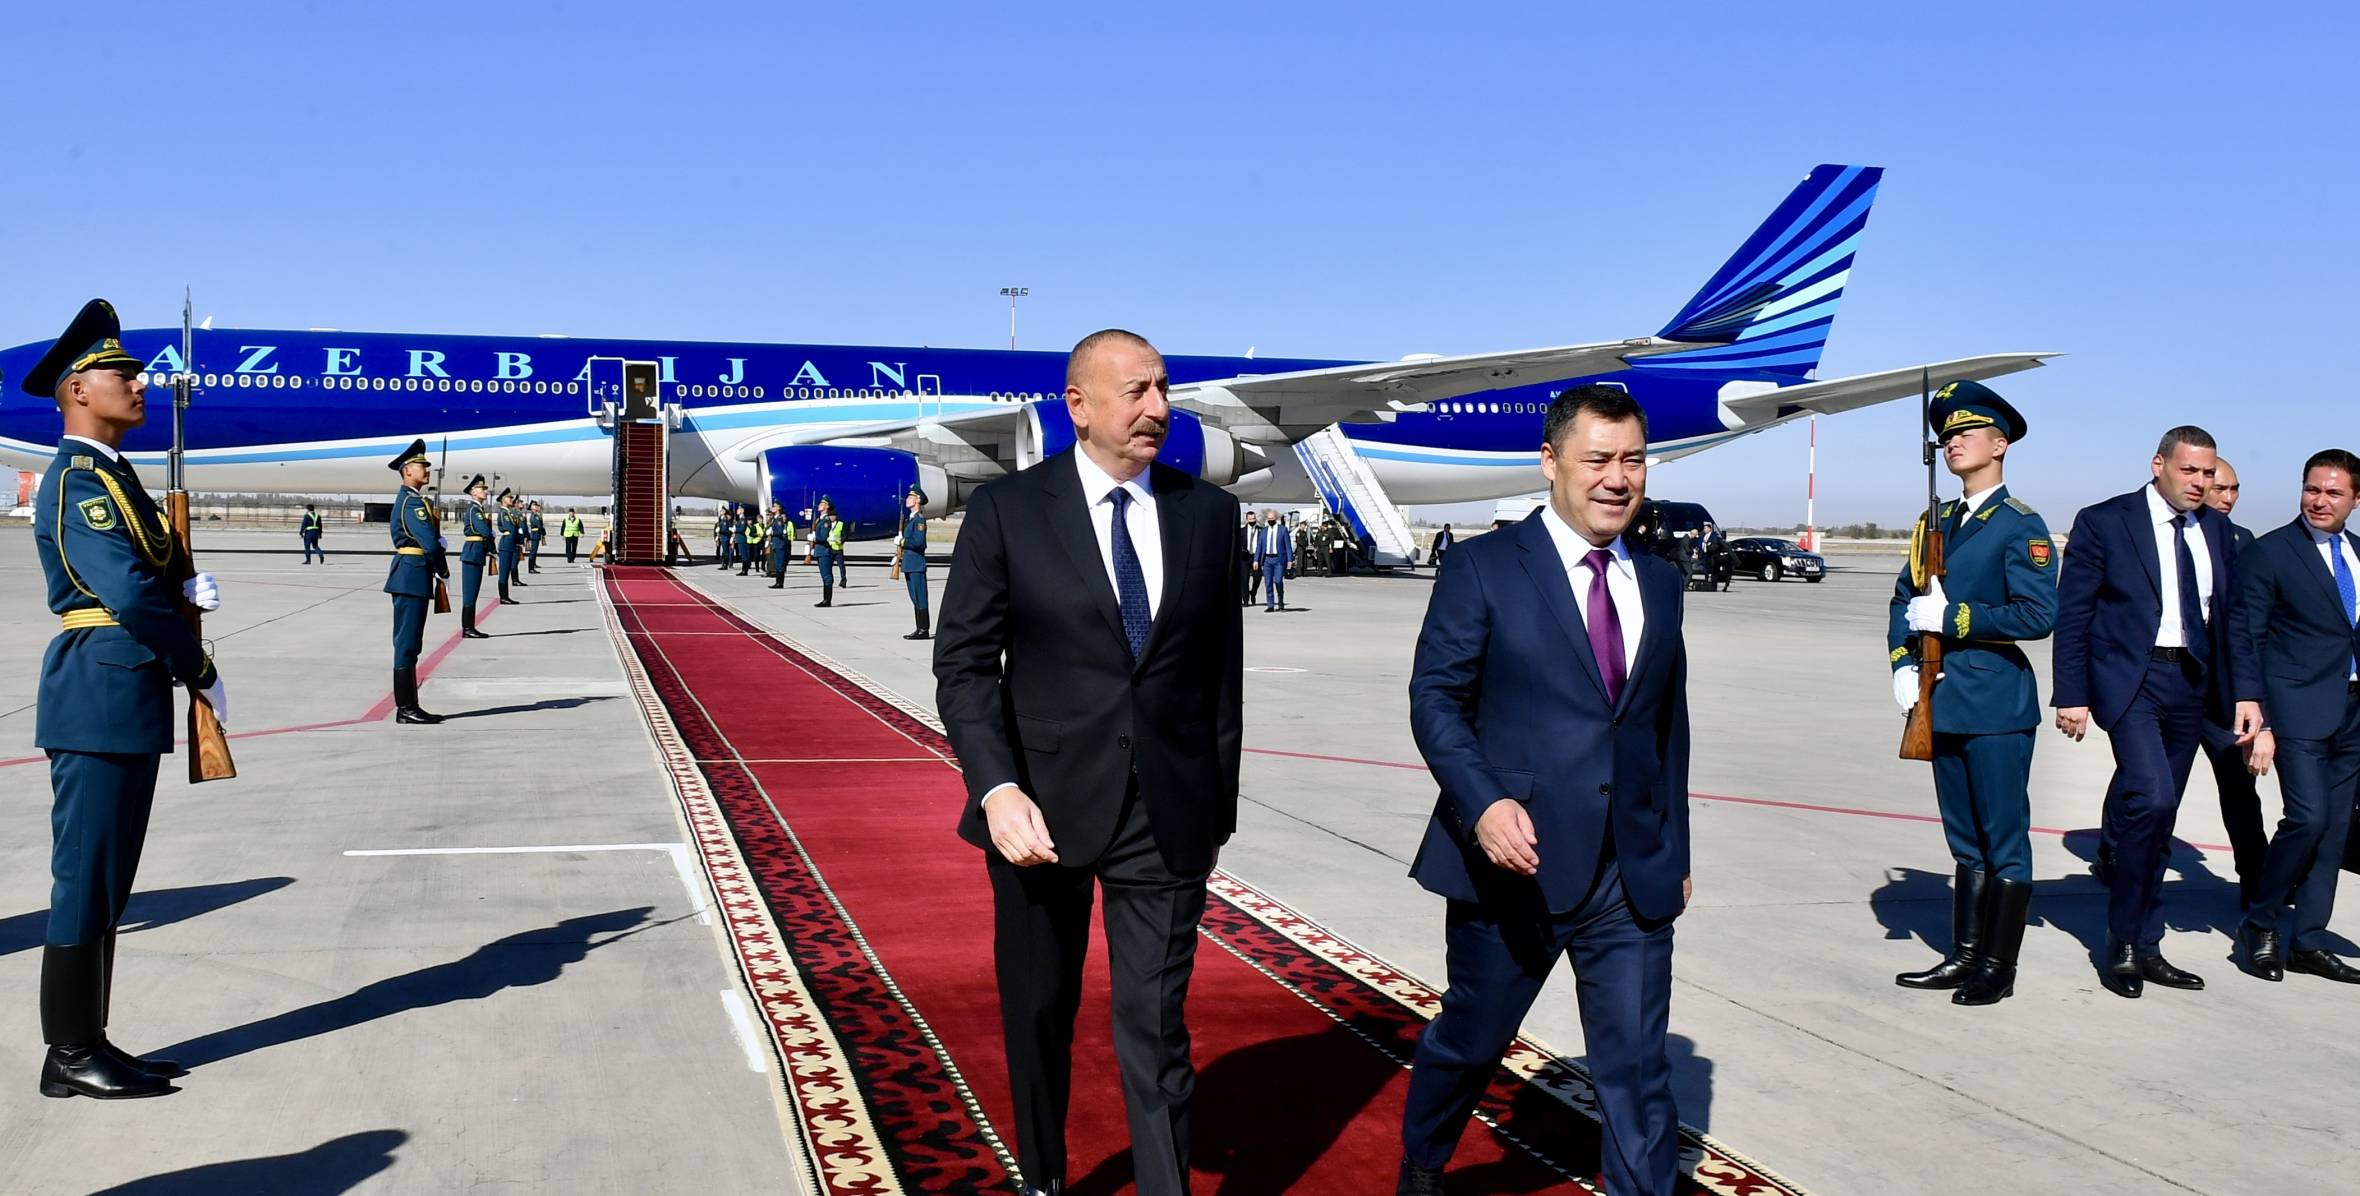 Ilham Aliyev arrived in Kyrgyzstan for state visit